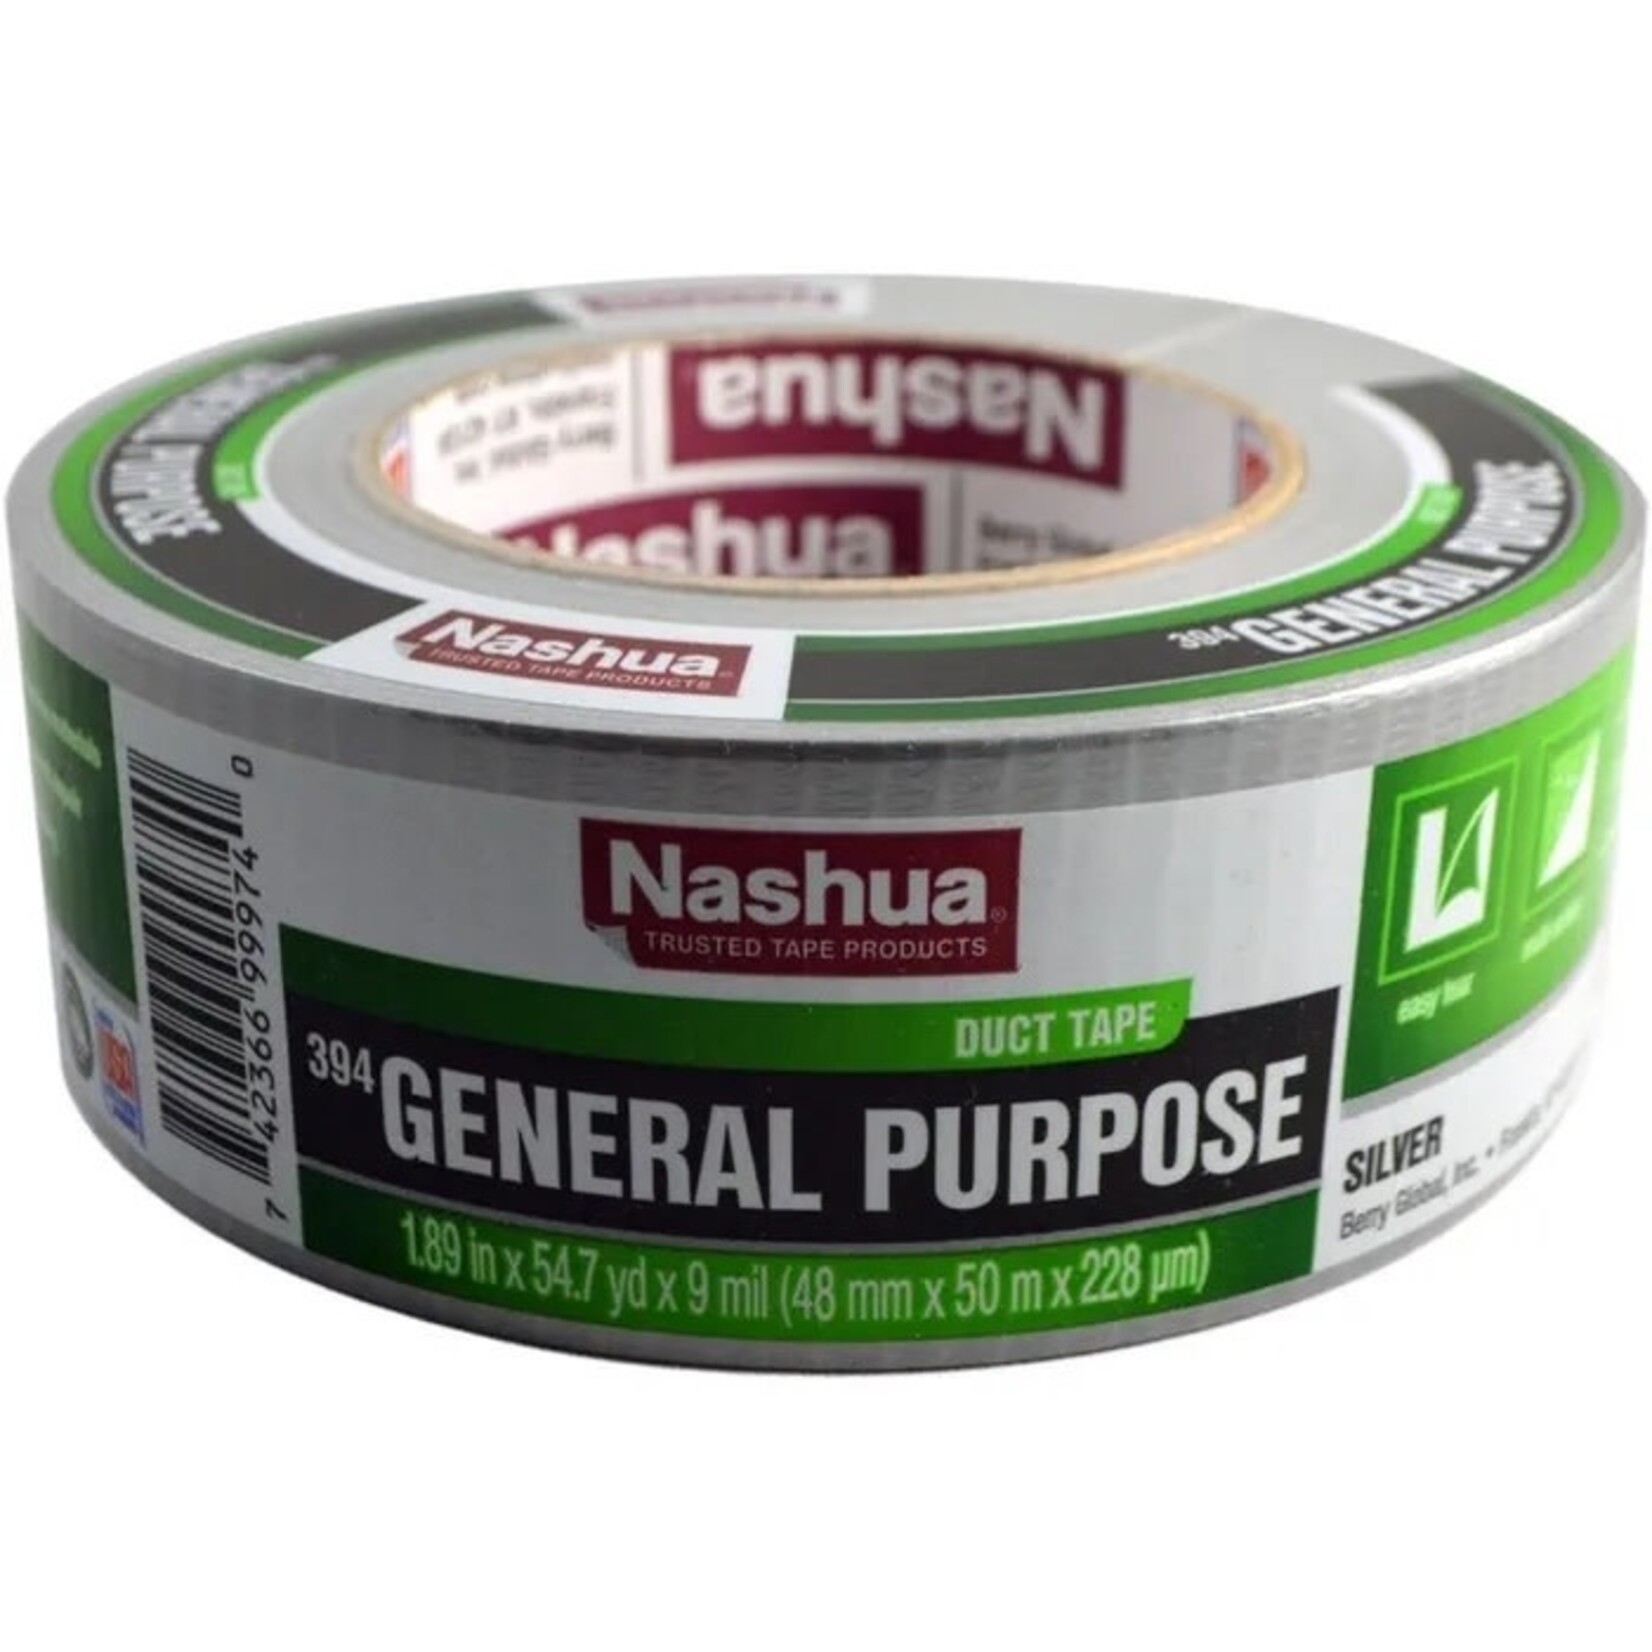 Nashua Nashua 1.89 in. x 55 yd. 394 General Purpose Duct Tape (Silver) #394